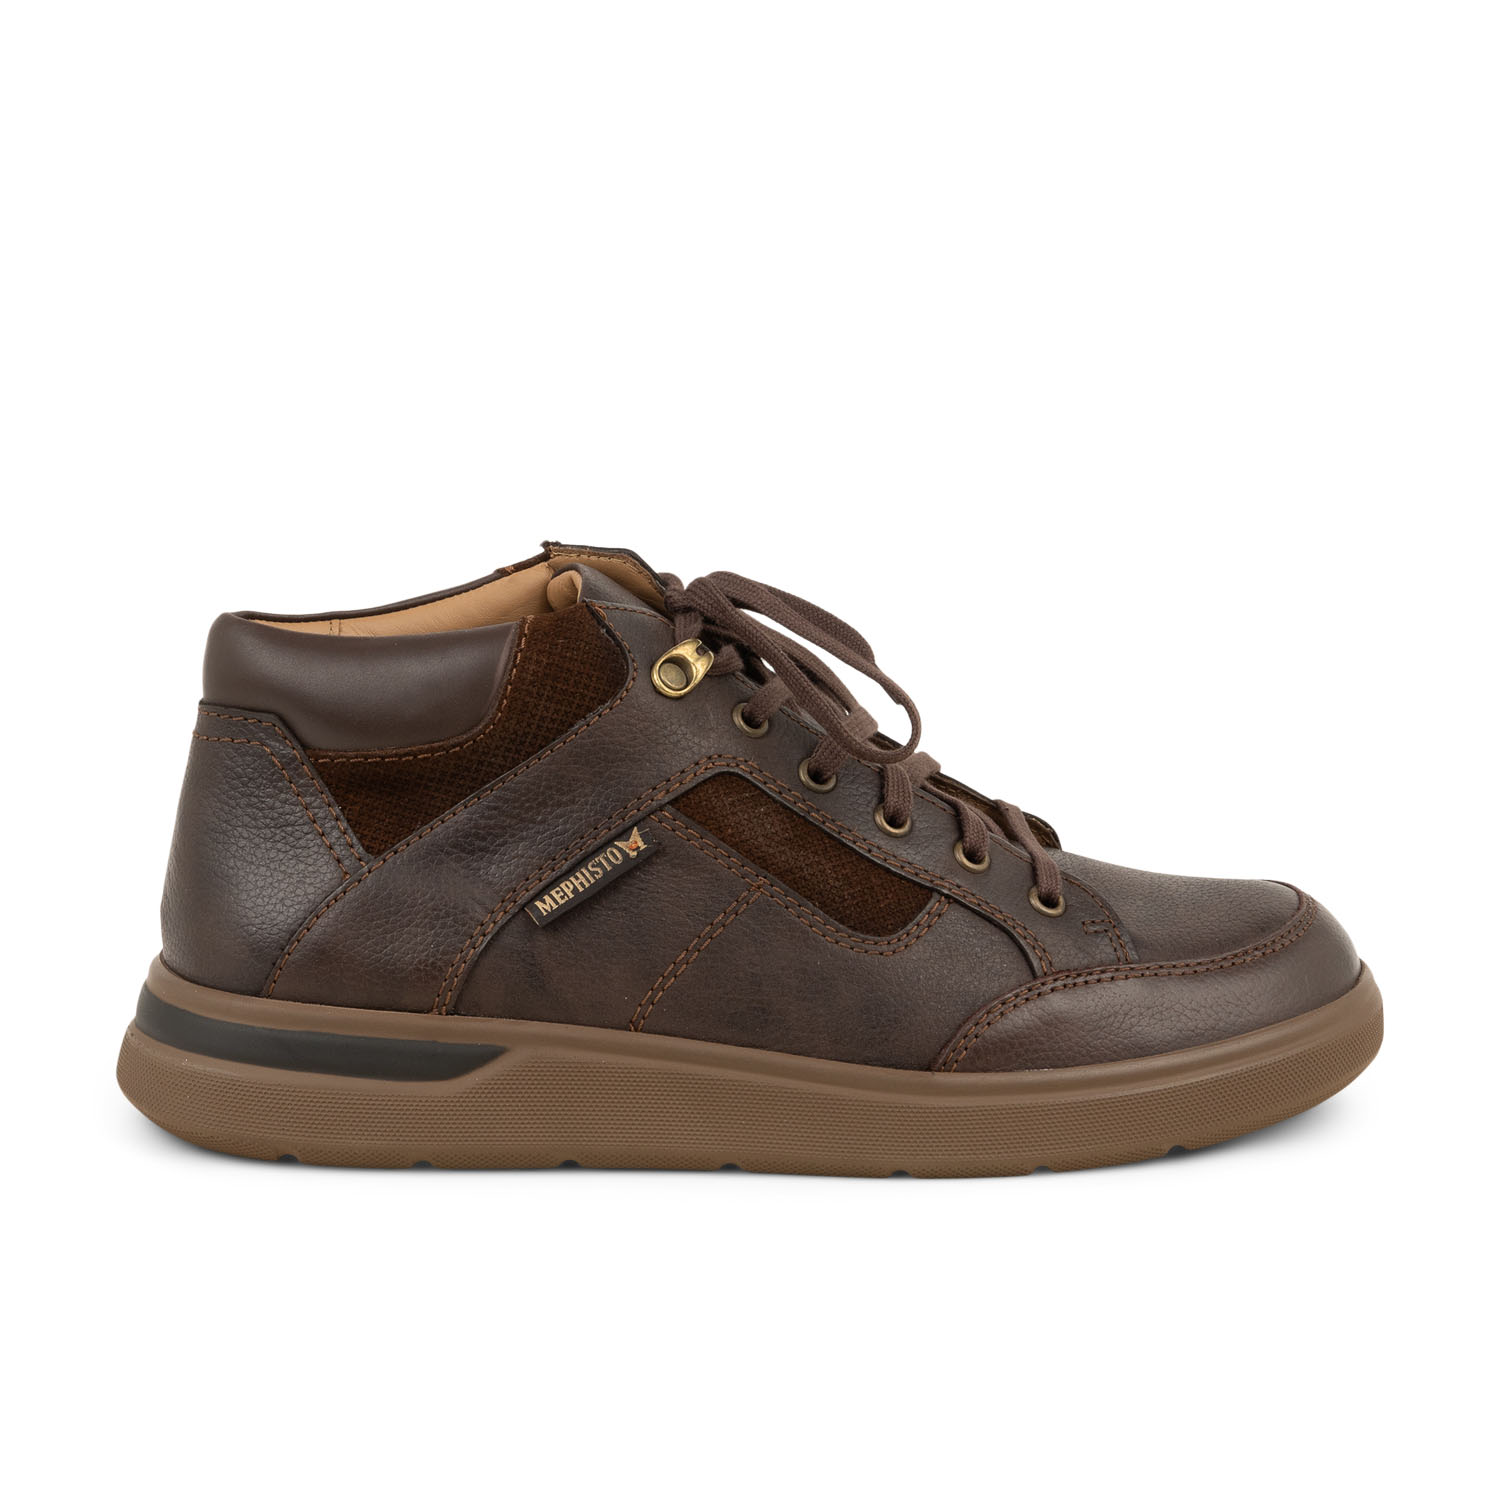 01 - ORTON - MEPHISTO - Chaussures à lacets - Cuir